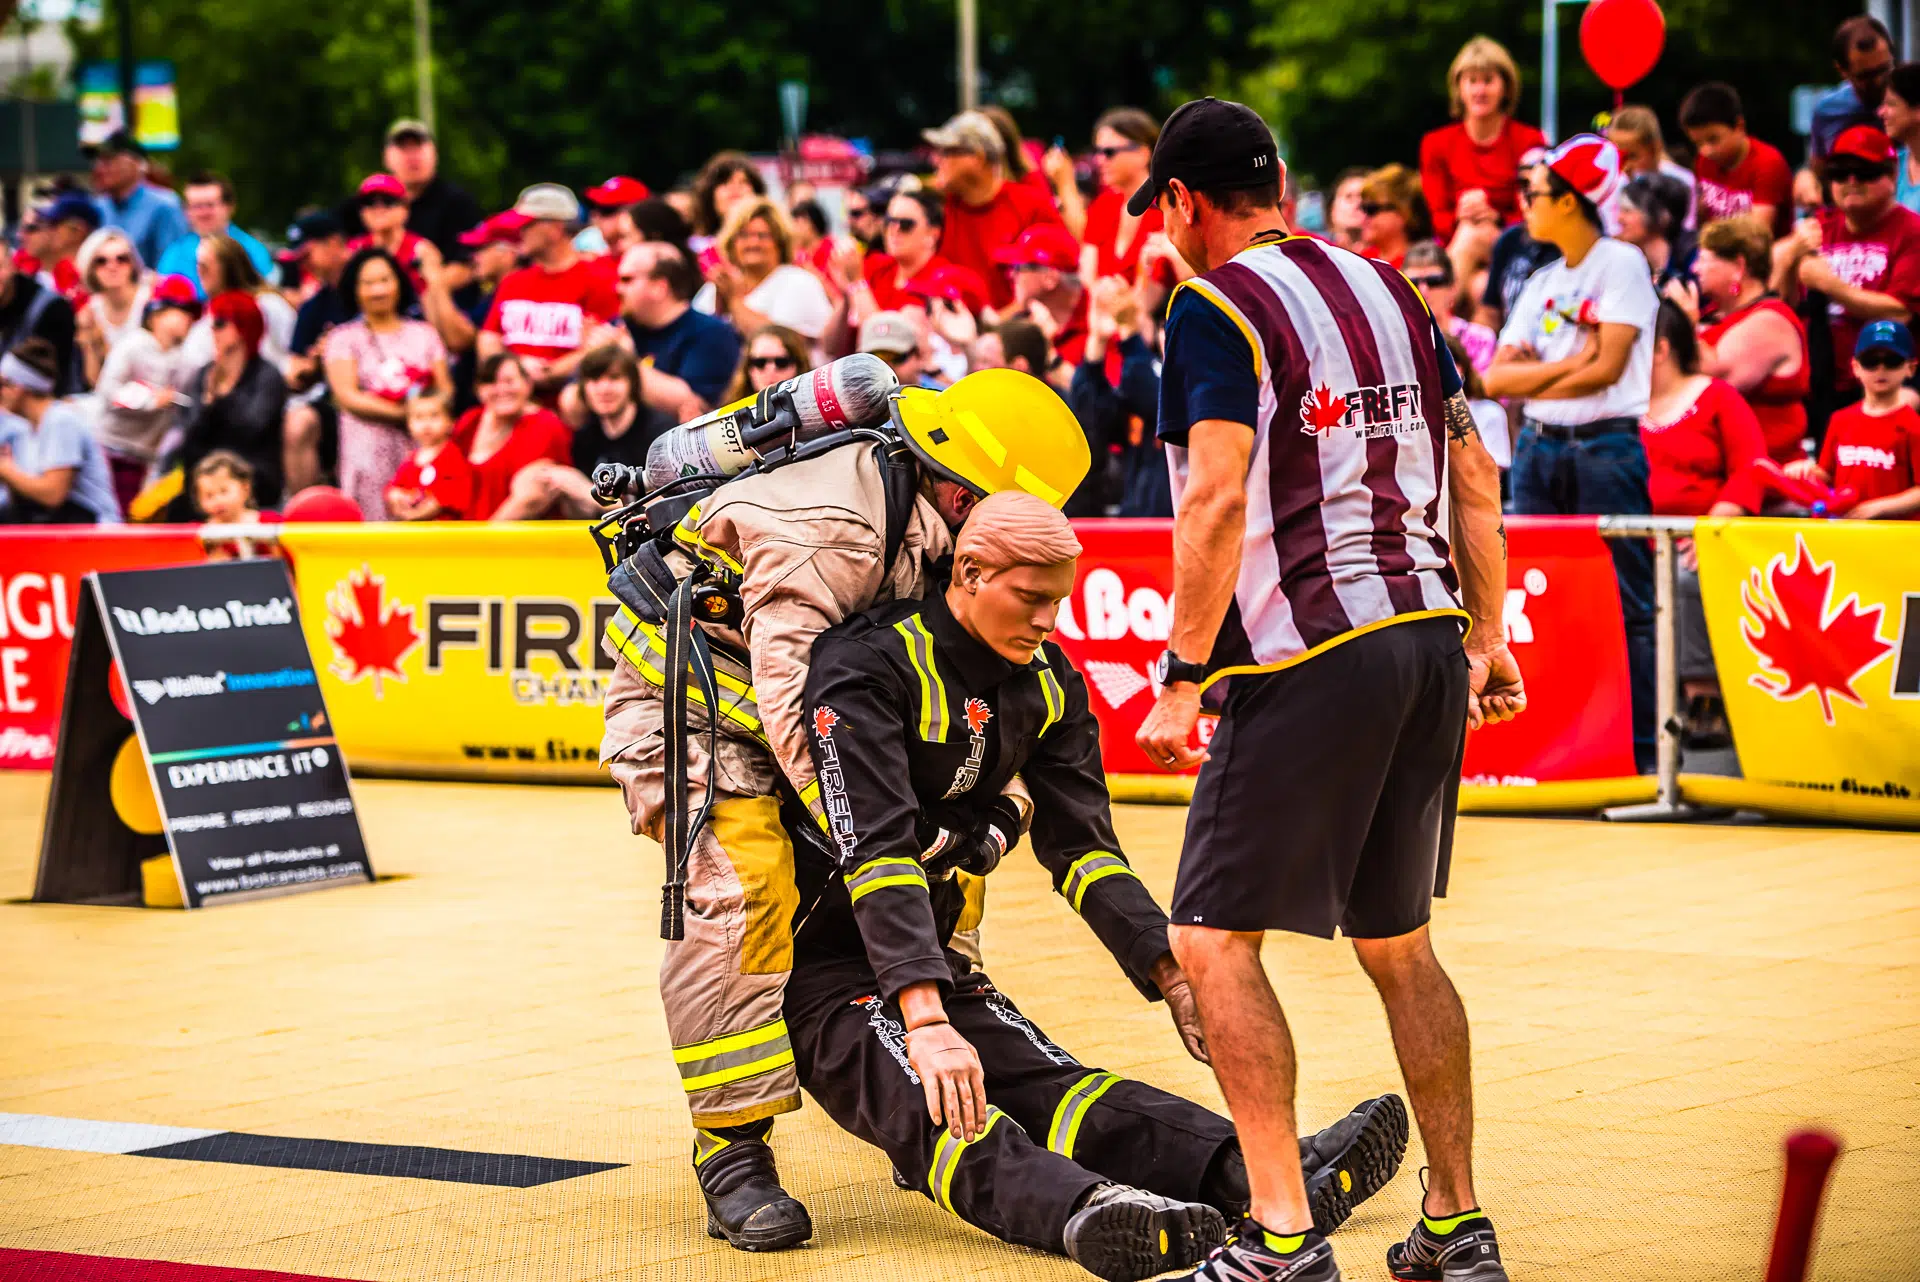 Quinte West Canada Day Celebrations Include FireFit Championship